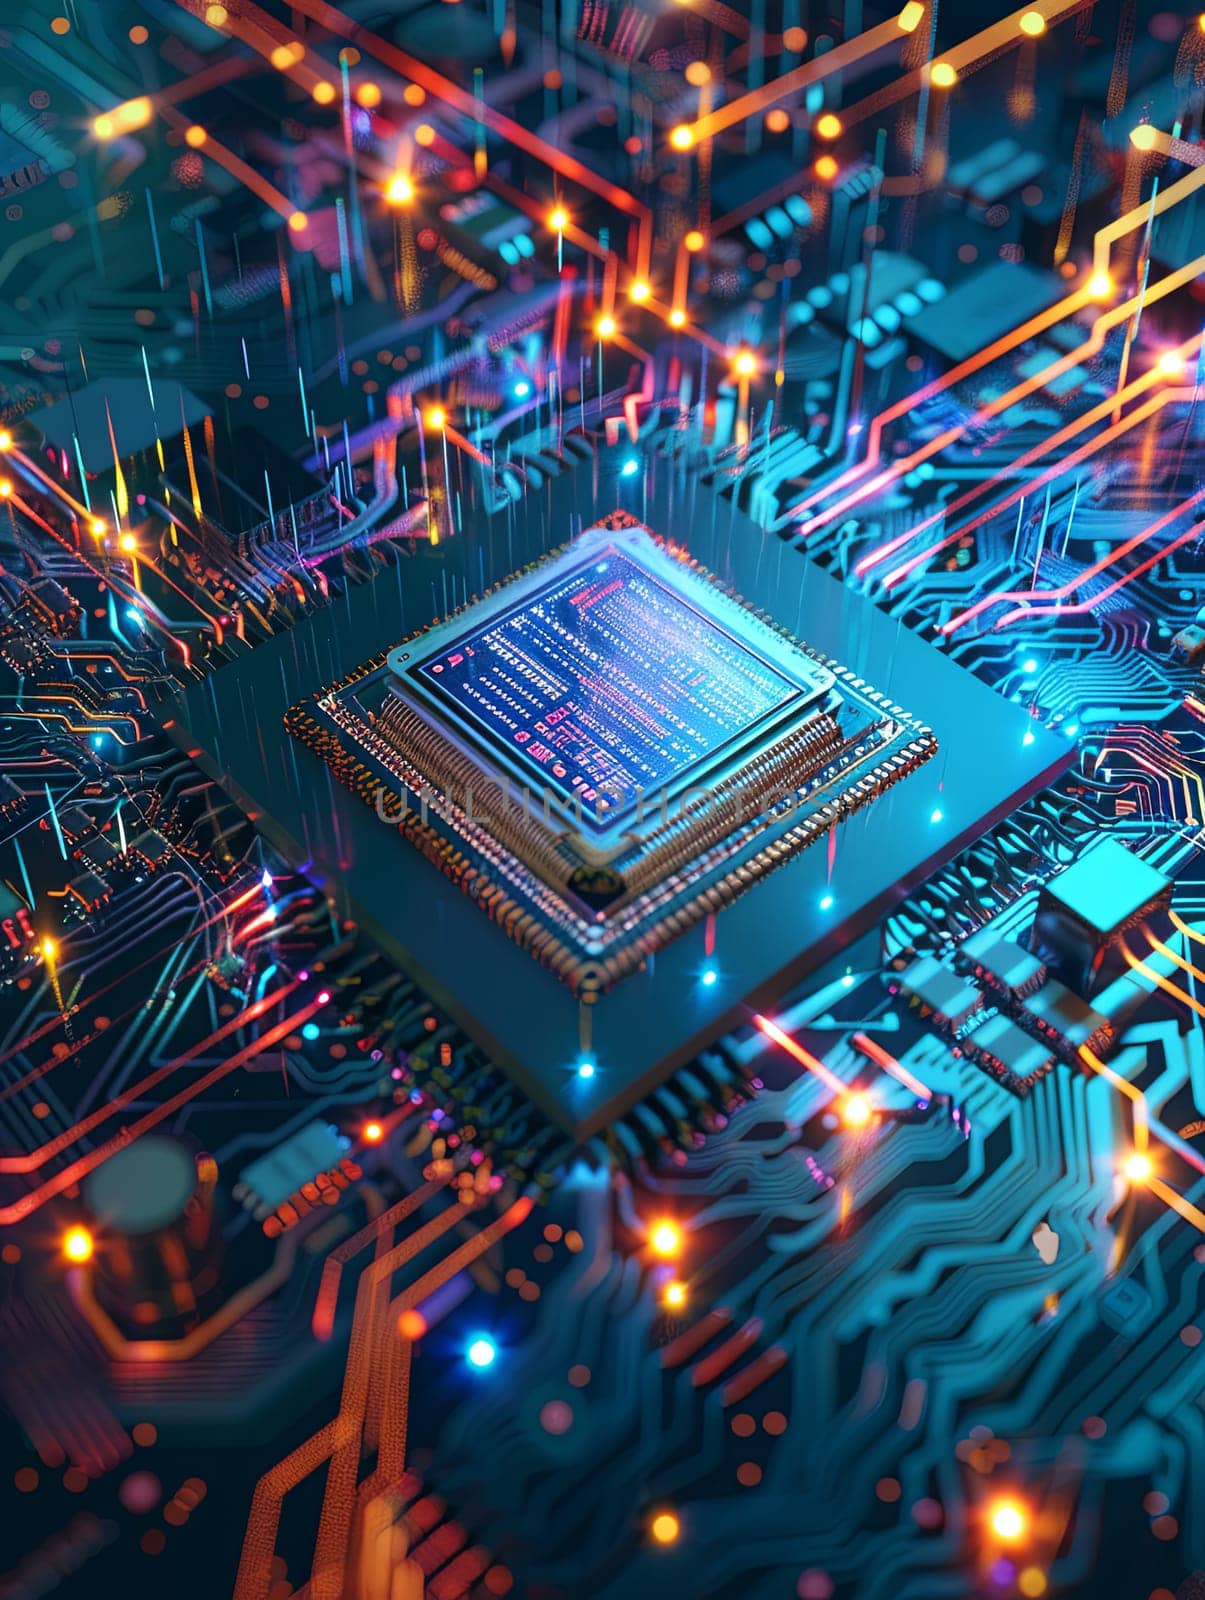 Close-up view of an ultra-modern microprocessor on a circuit board, illuminated by glowing light and digital data streams.